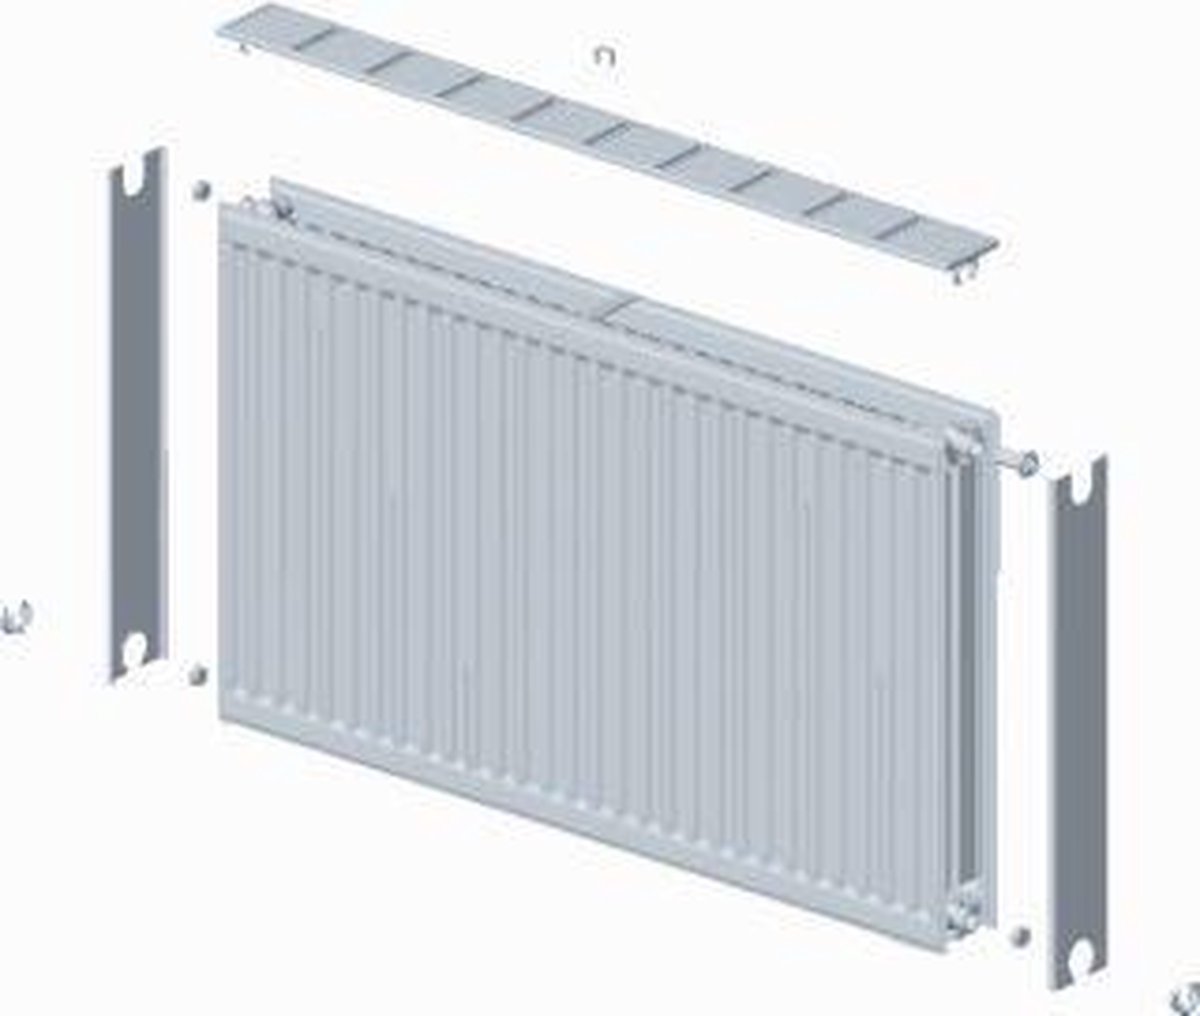 Stelrad paneelradiator Novello, staal, wit, (hxlxd) 600x900x100mm, 22